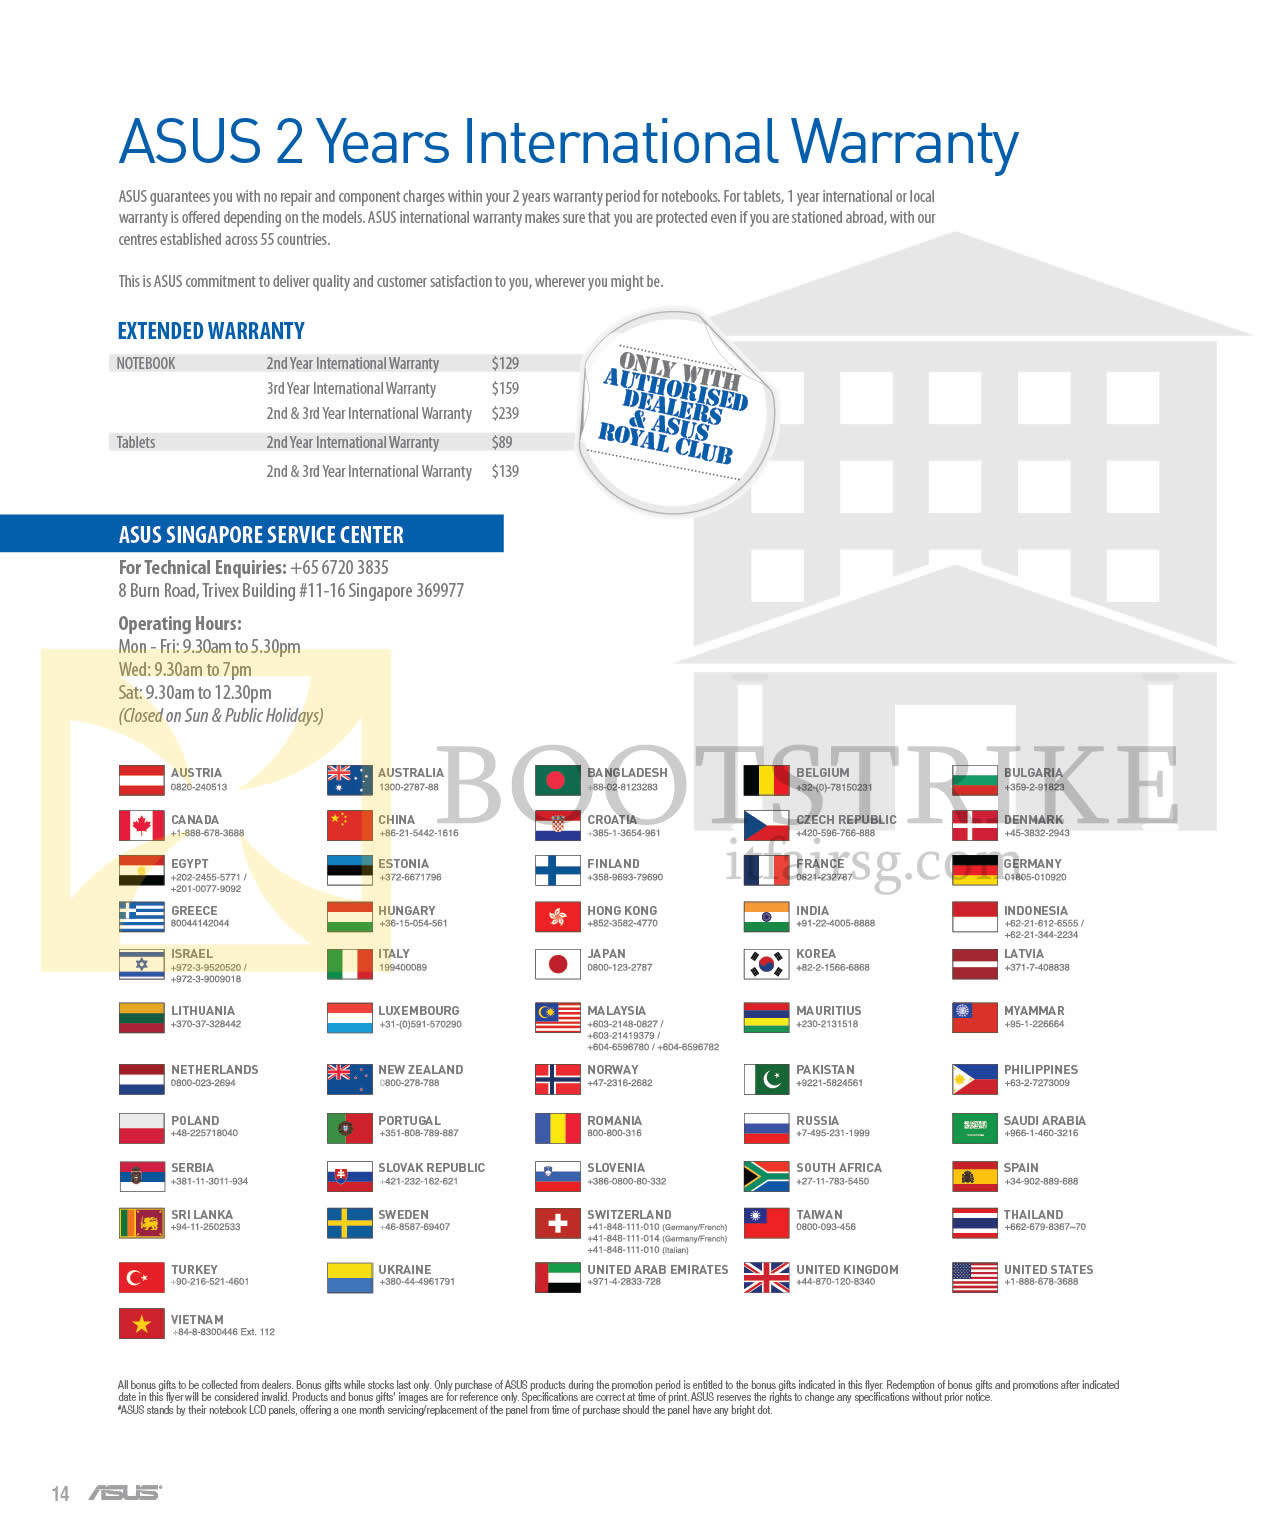 COMEX 2014 price list image brochure of ASUS Warranty 2 Years International Countries